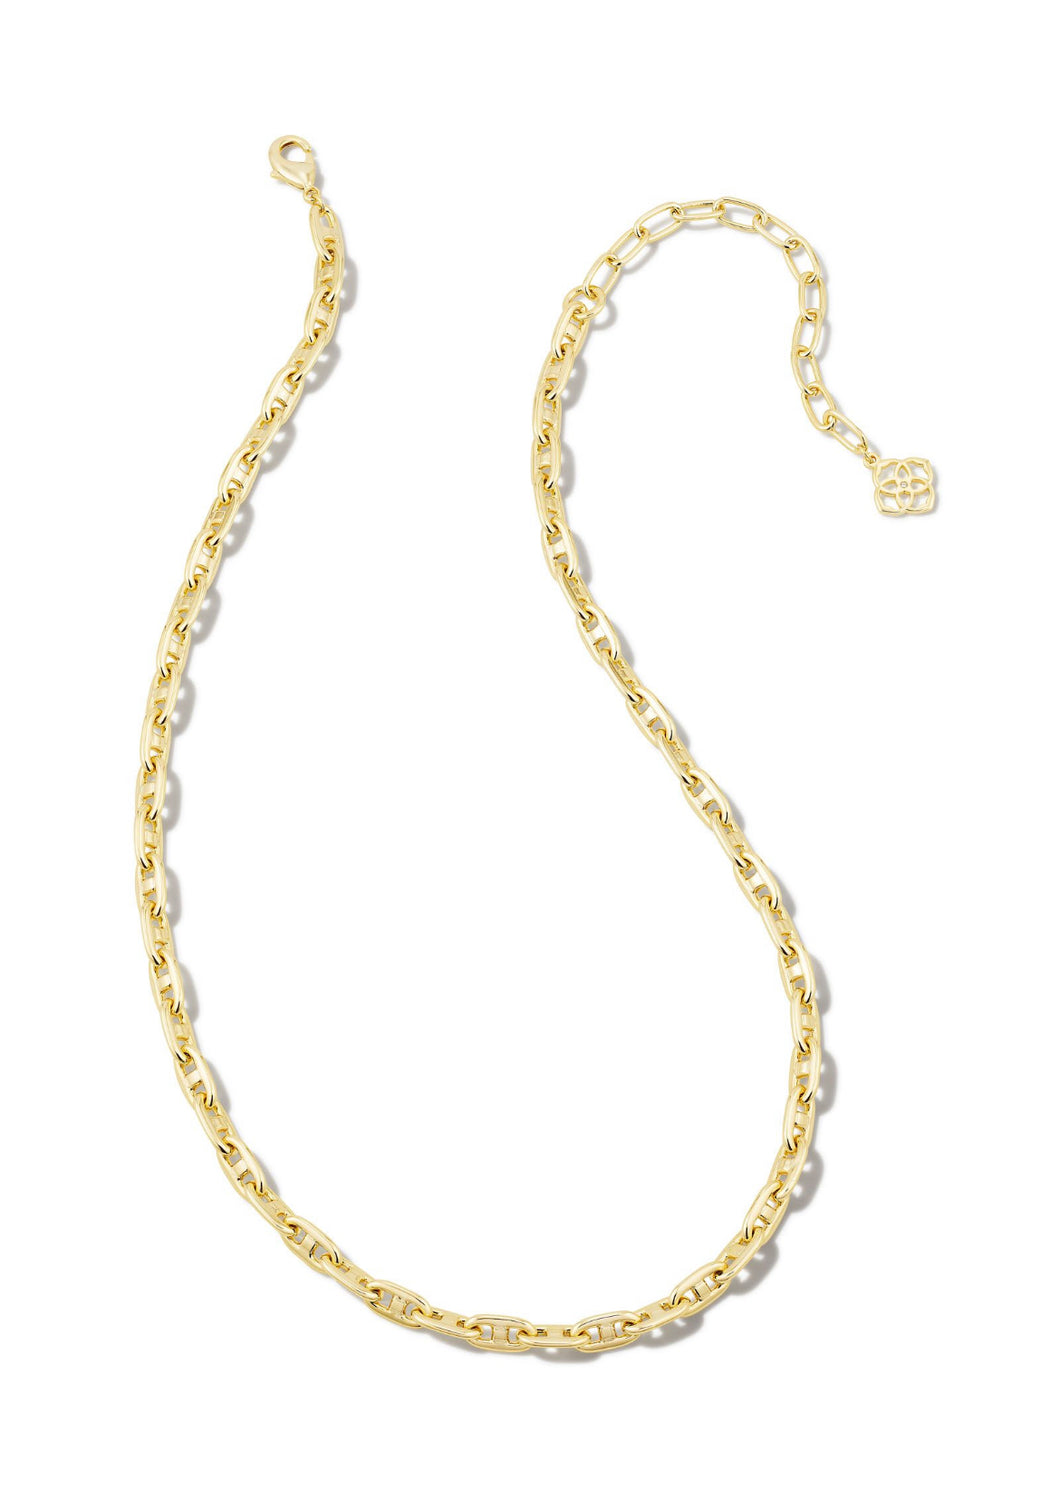 Kendra Scott: Bailey Chain Necklace in Gold